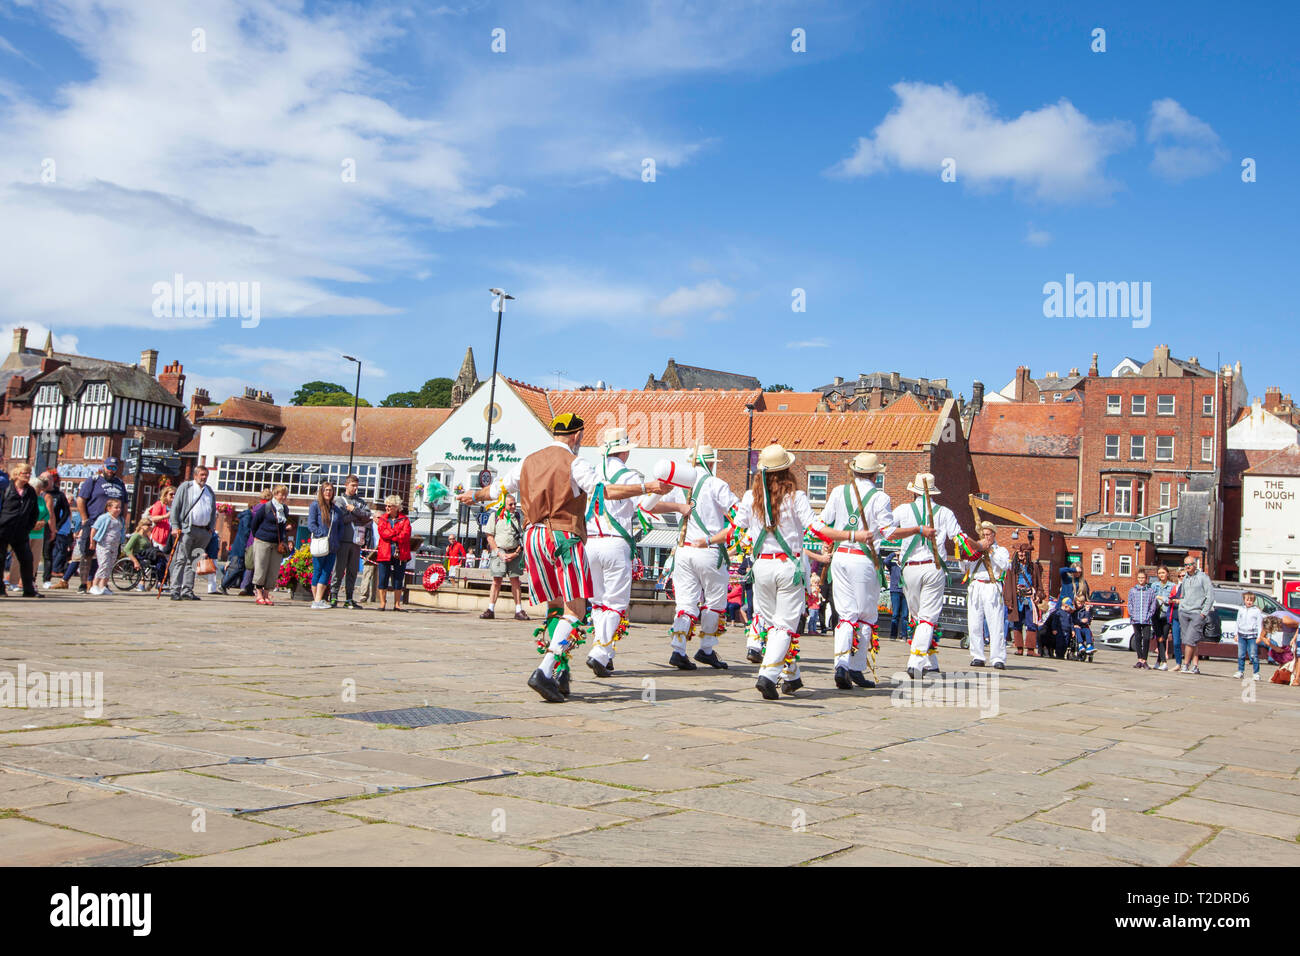 celebrations and dancing on the streets at Whitby Folk week 2018, North Yorkshire coast, England Stock Photo